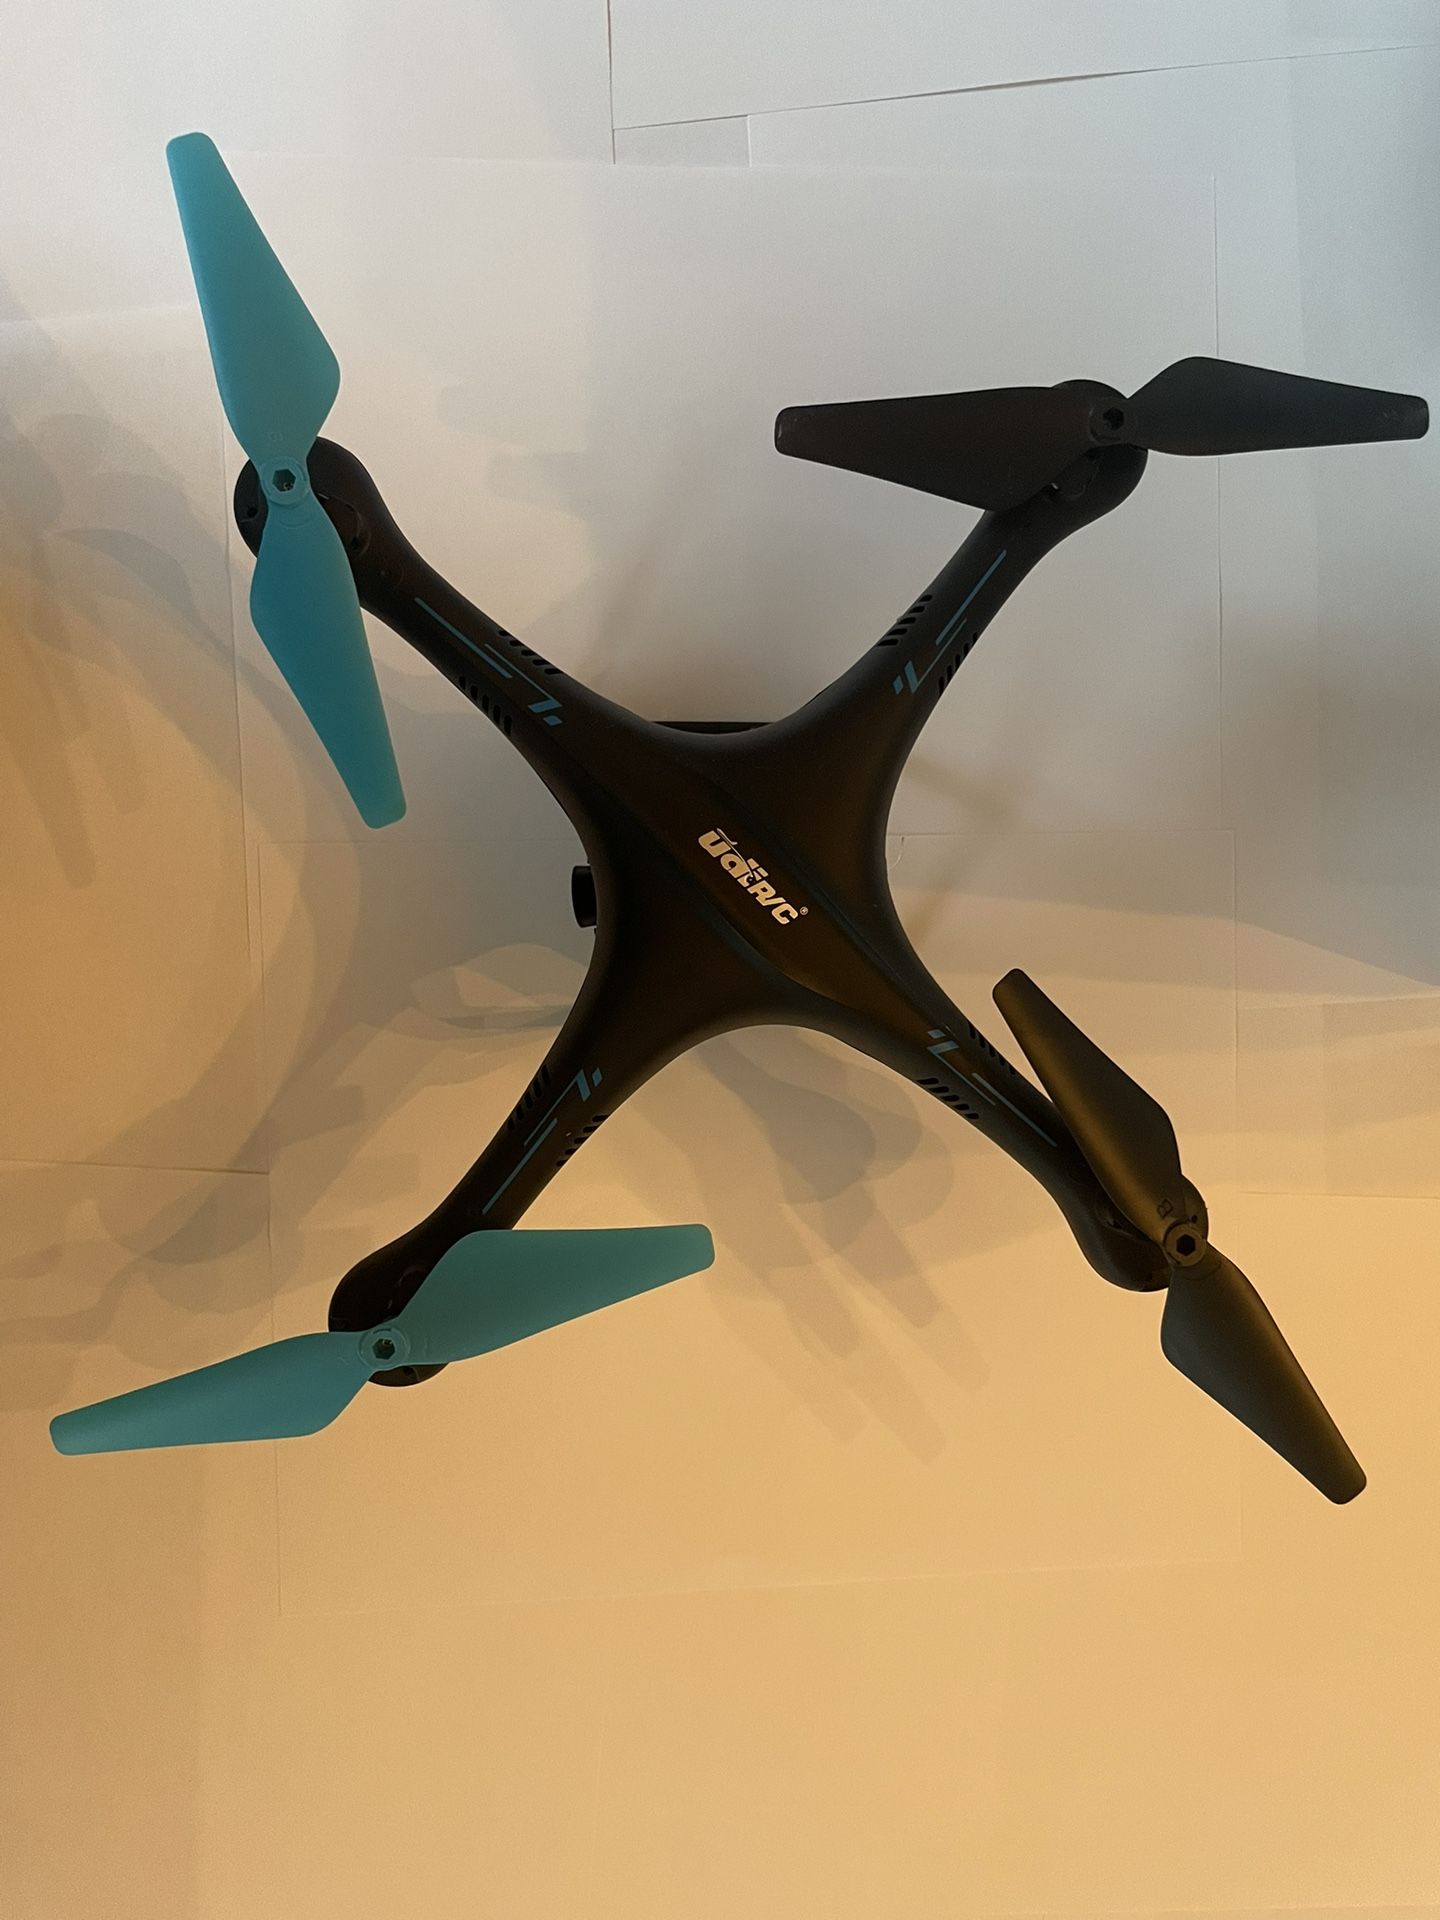 Force 1 Blue Jay Drone